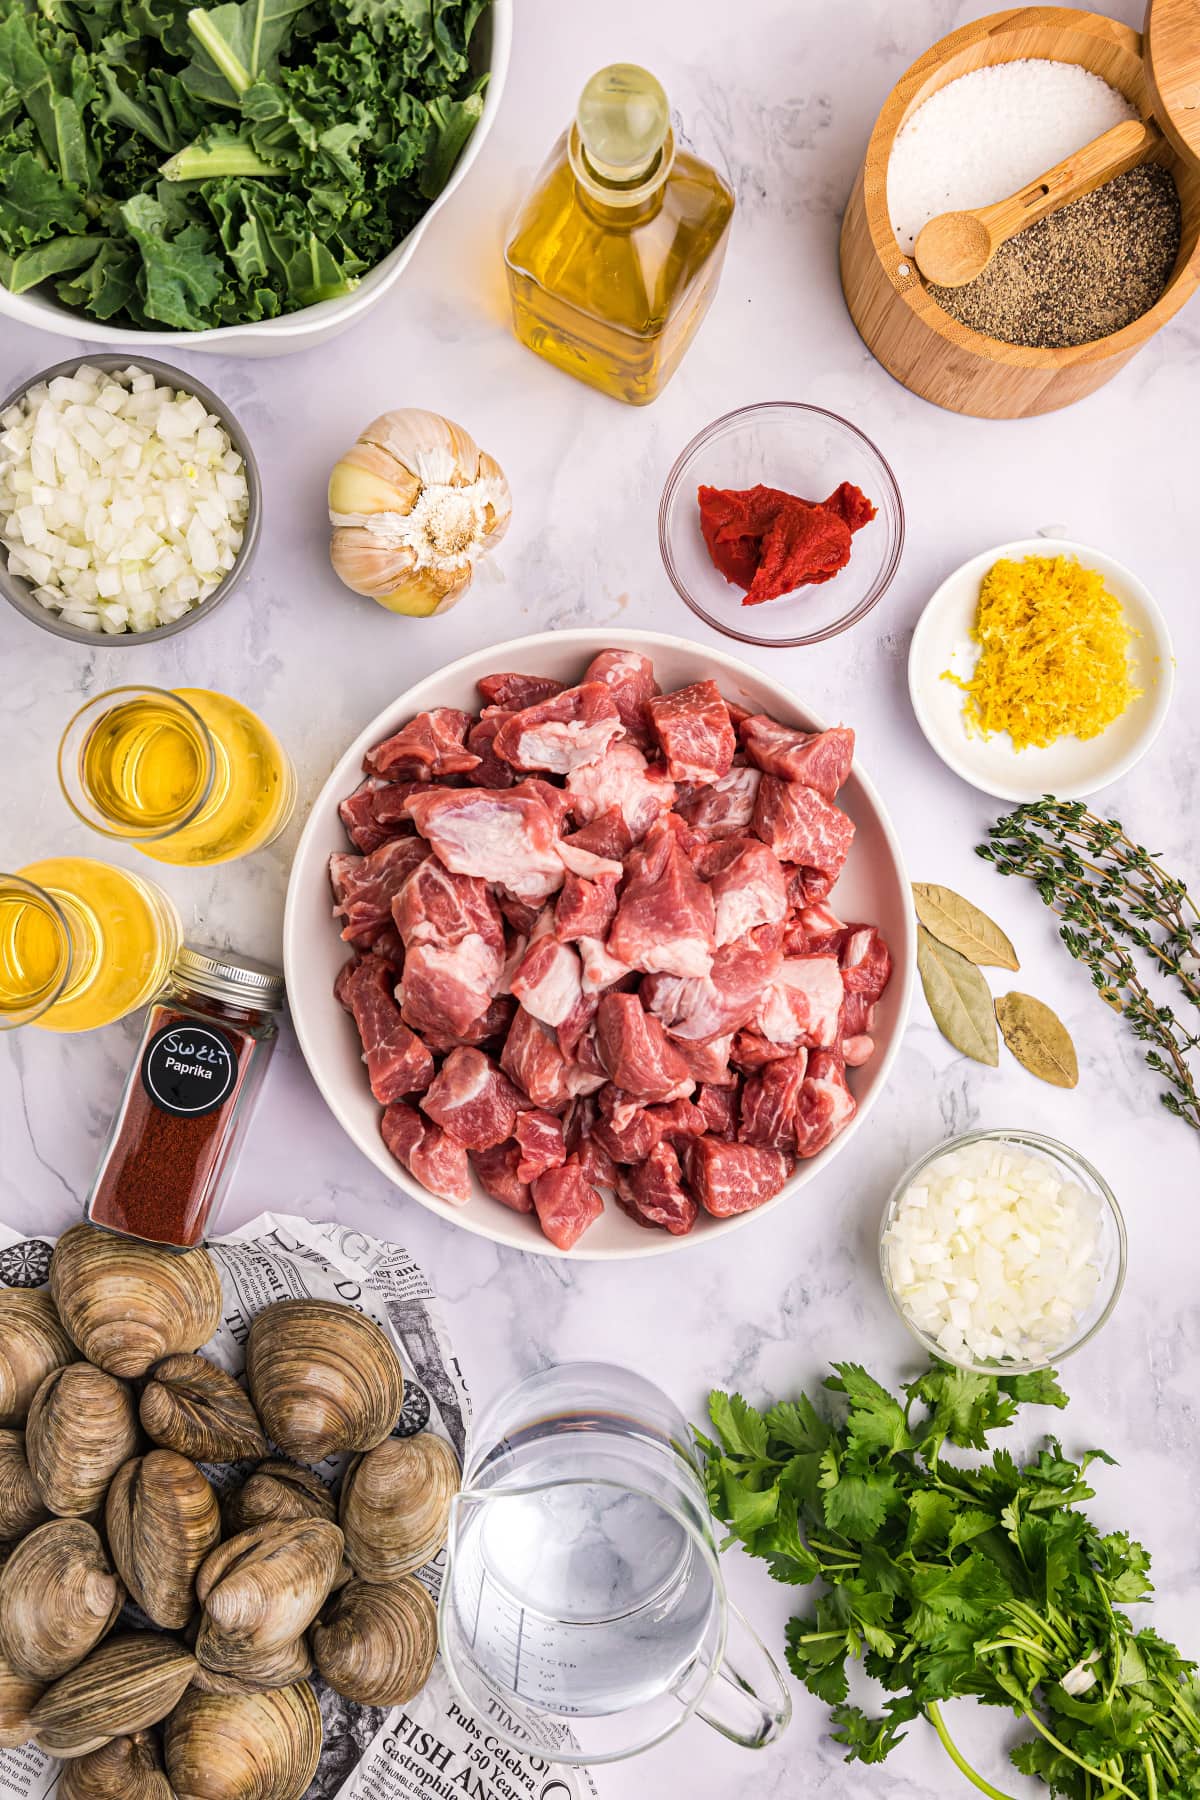 ingredients displayed for making pork stew with clams and mussels